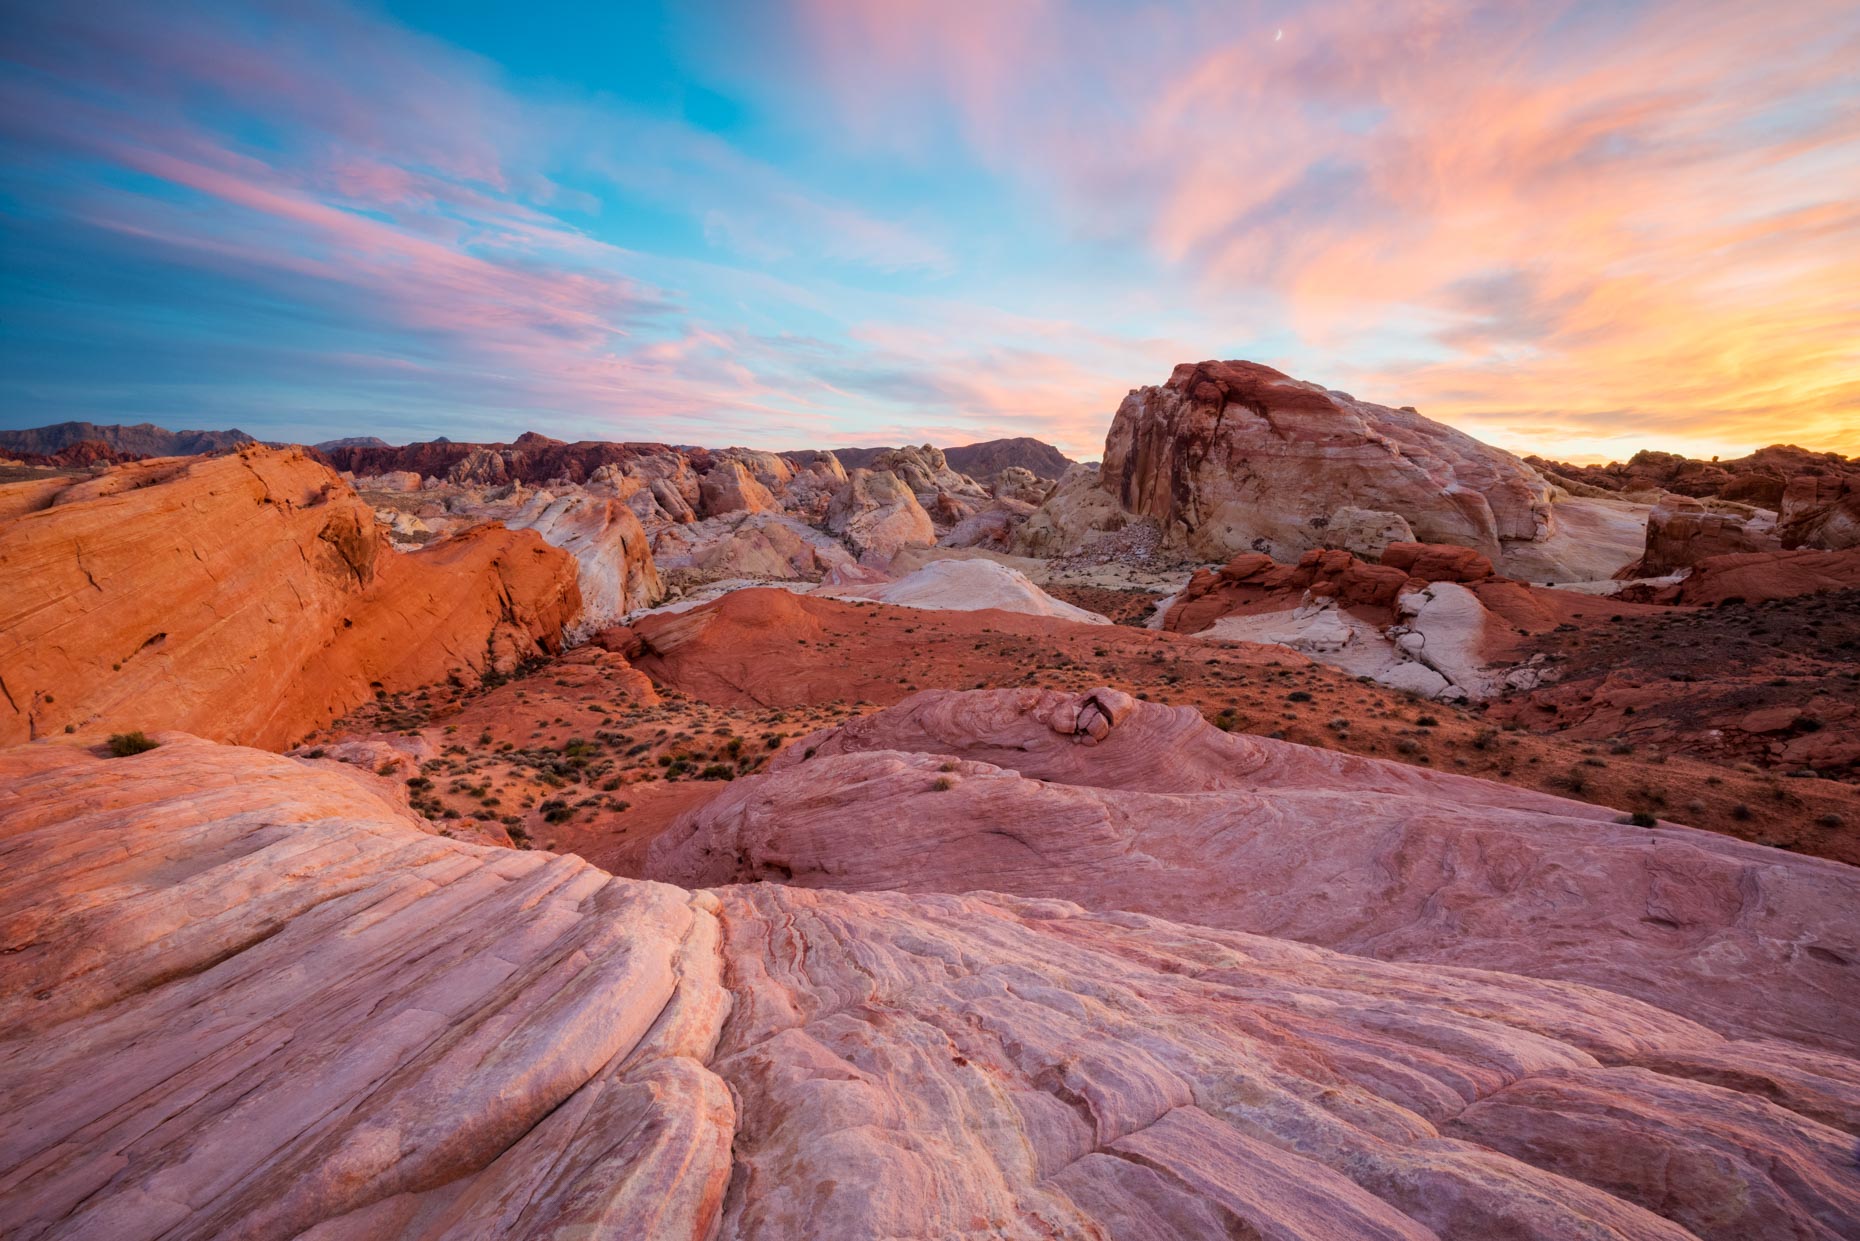 Sunset Over White Domes - Valley Of Fire State Park, Nevada